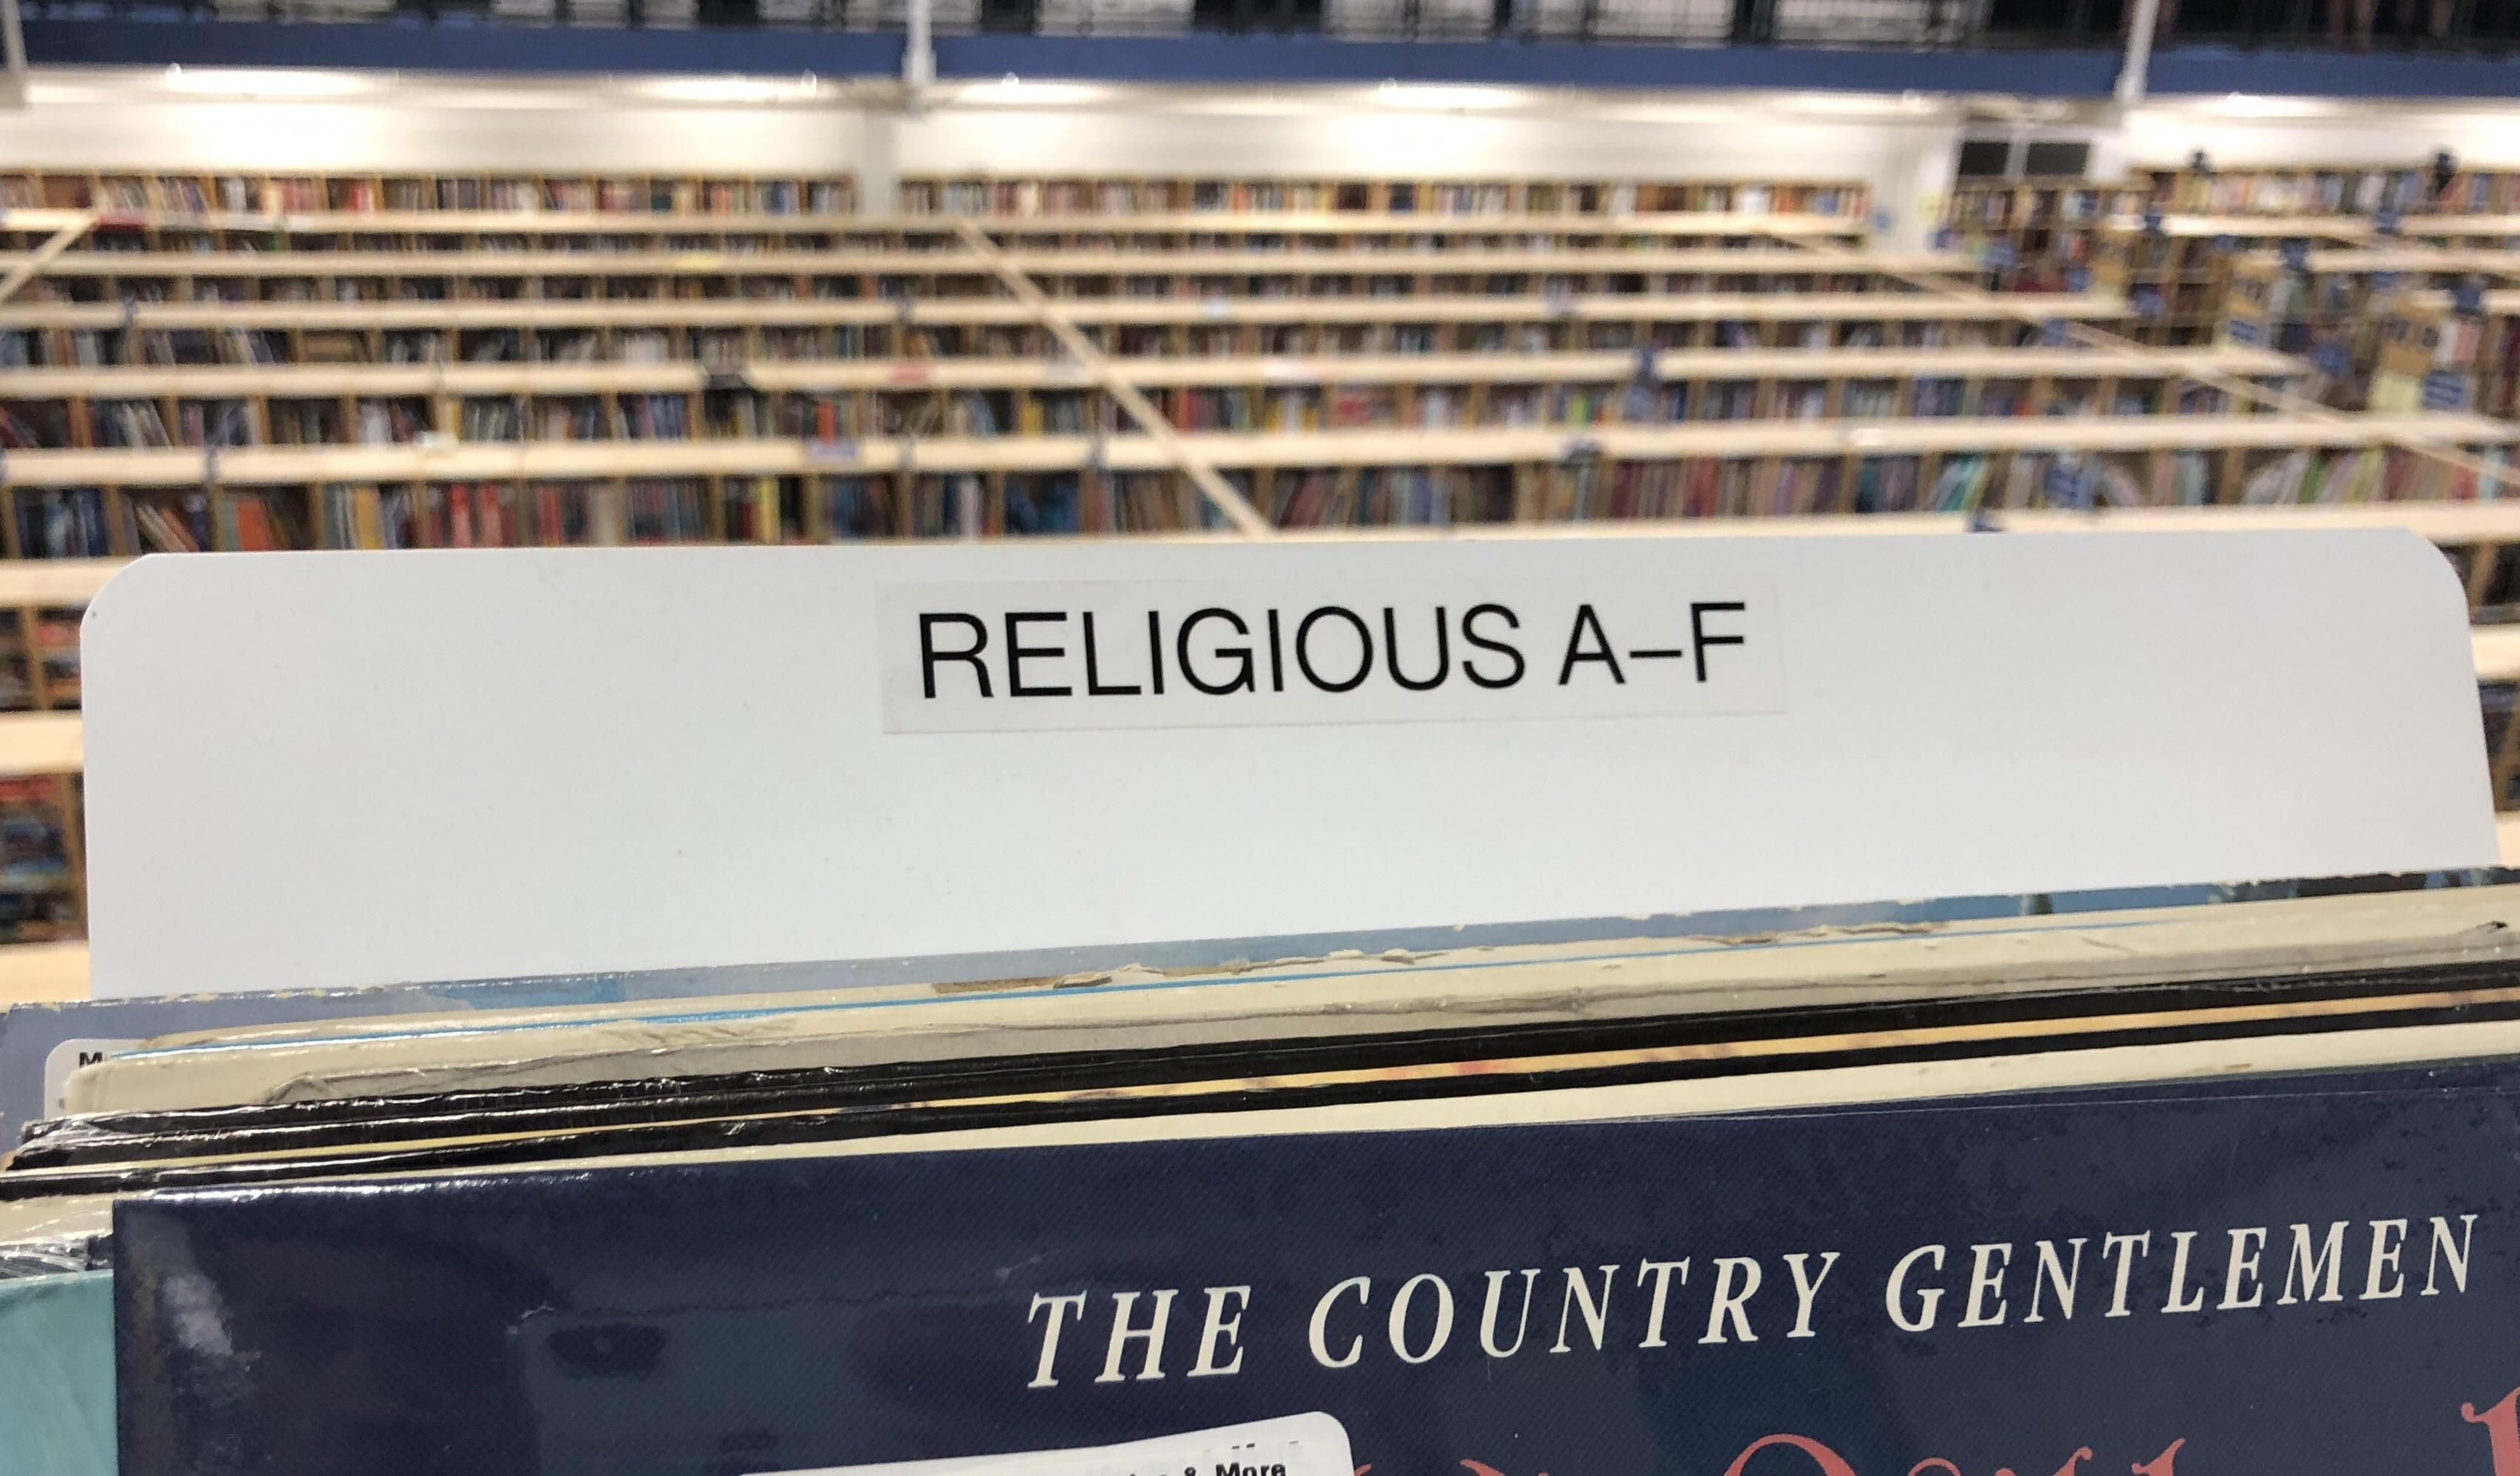 This section is religious as f*#k